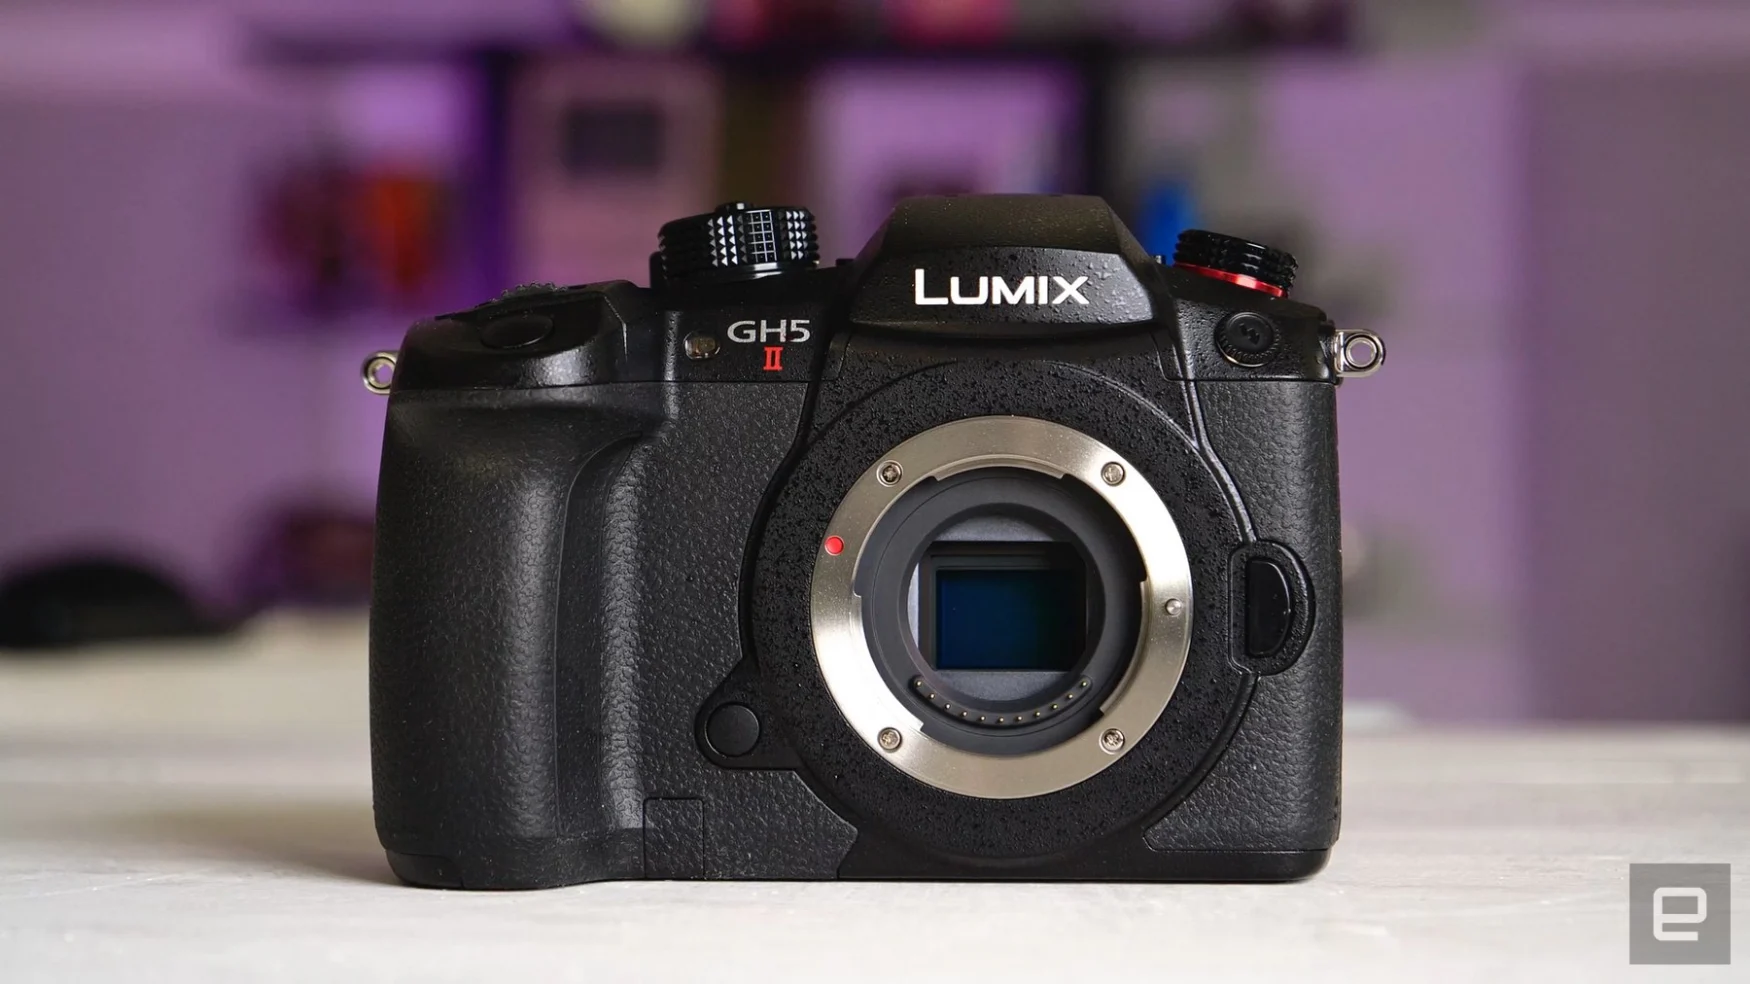 Panasonic GH5 II review: A vlogging classic gains speed and streaming powers